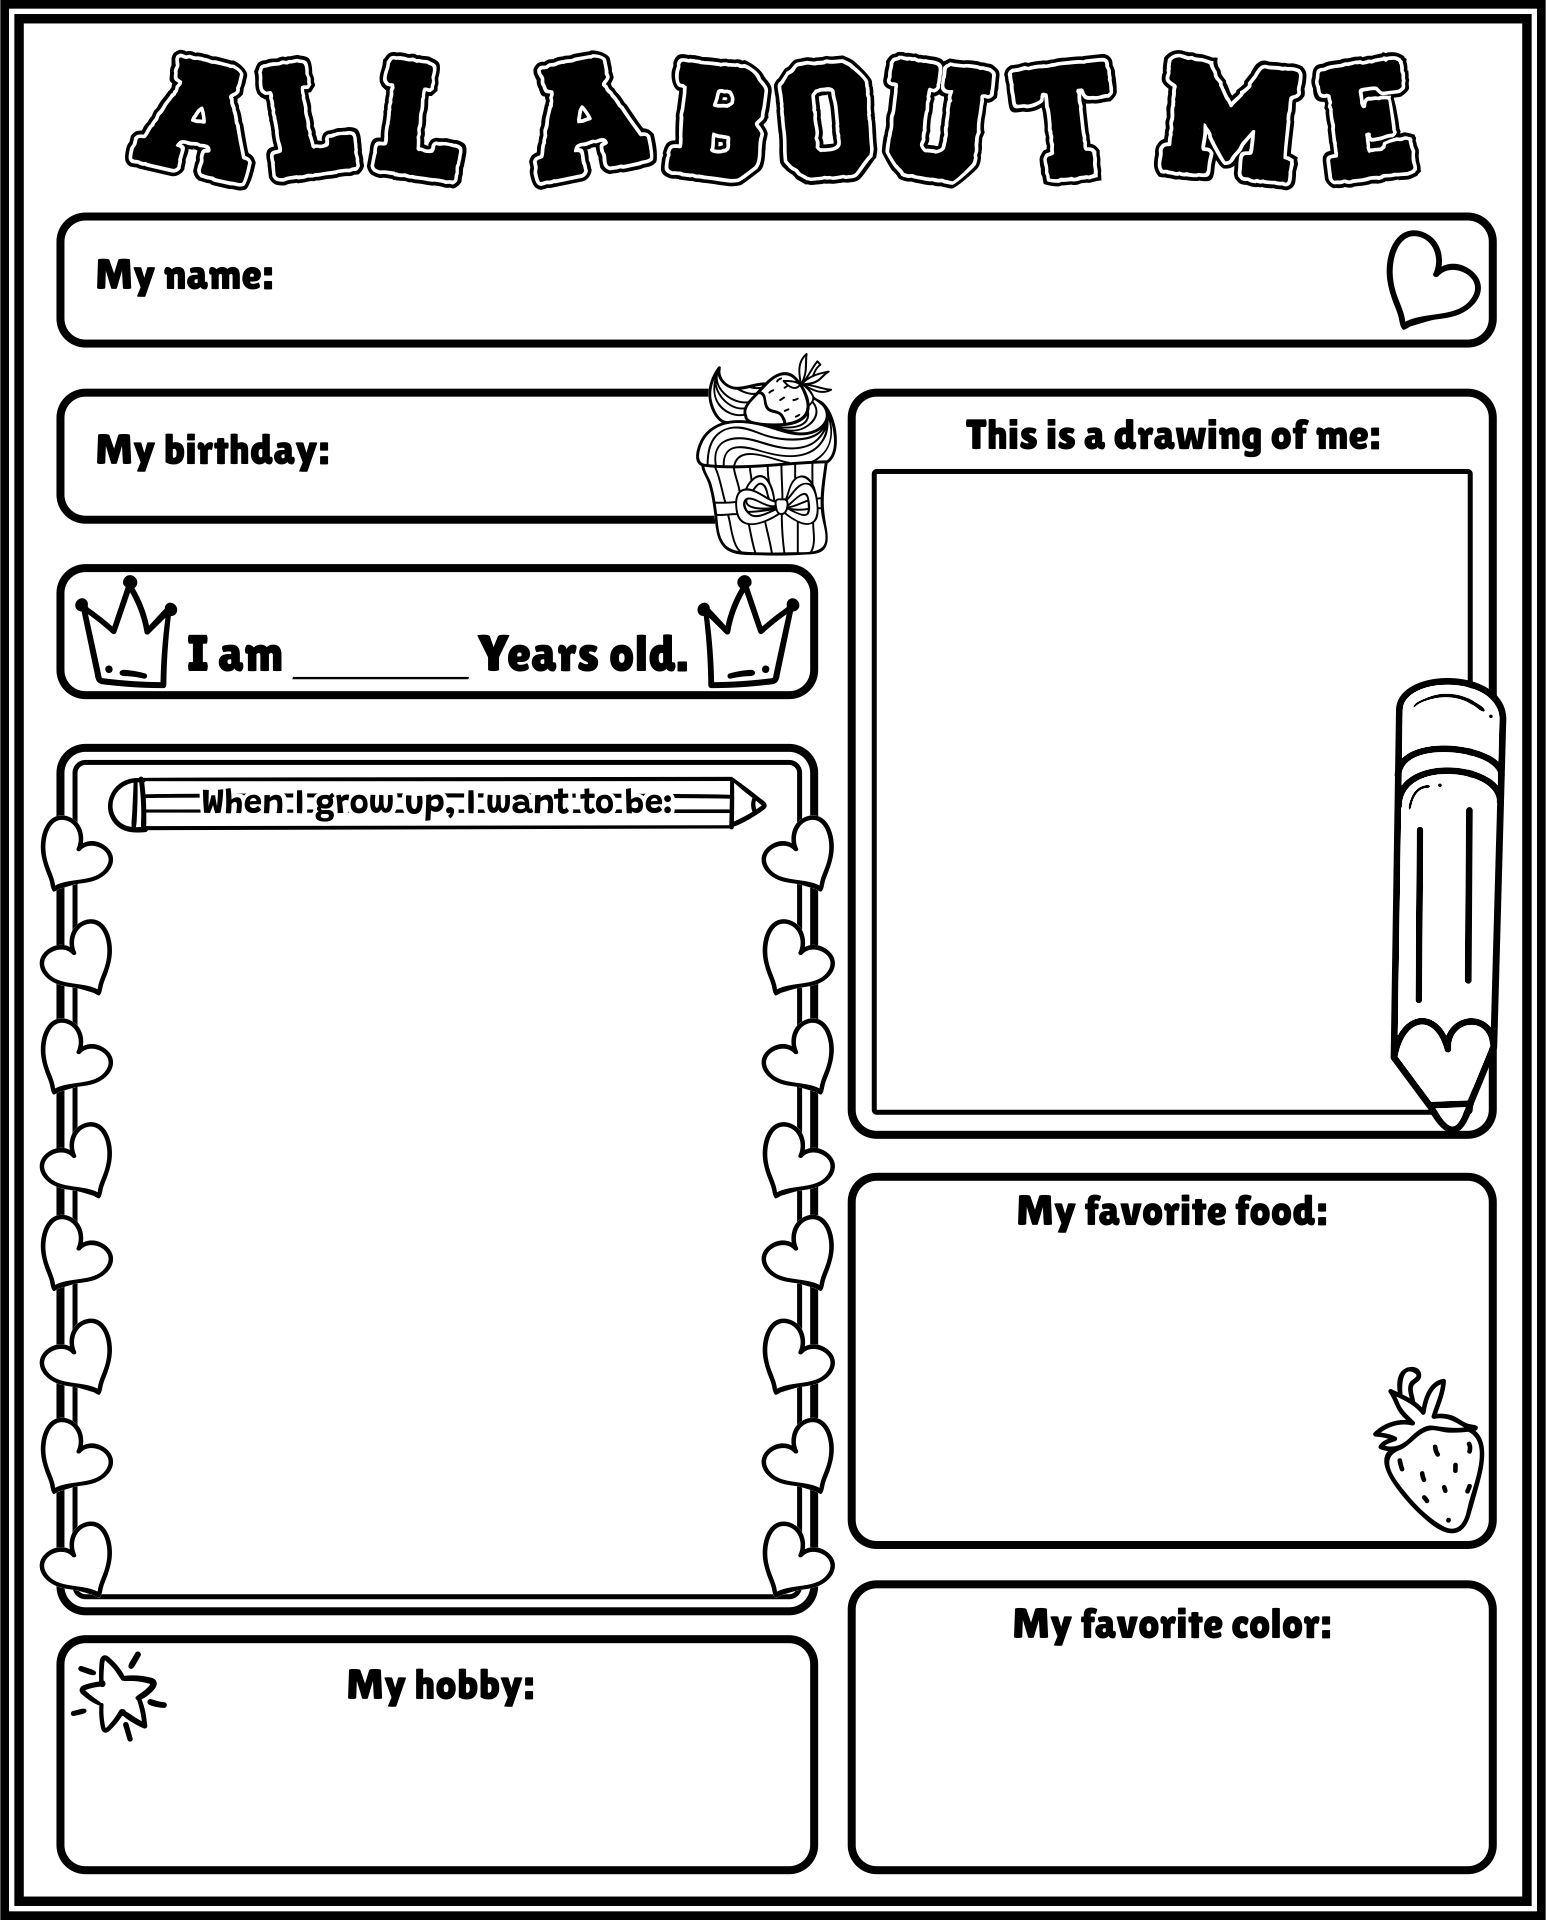 6 Best Images of All About Me Printable Template - All ...